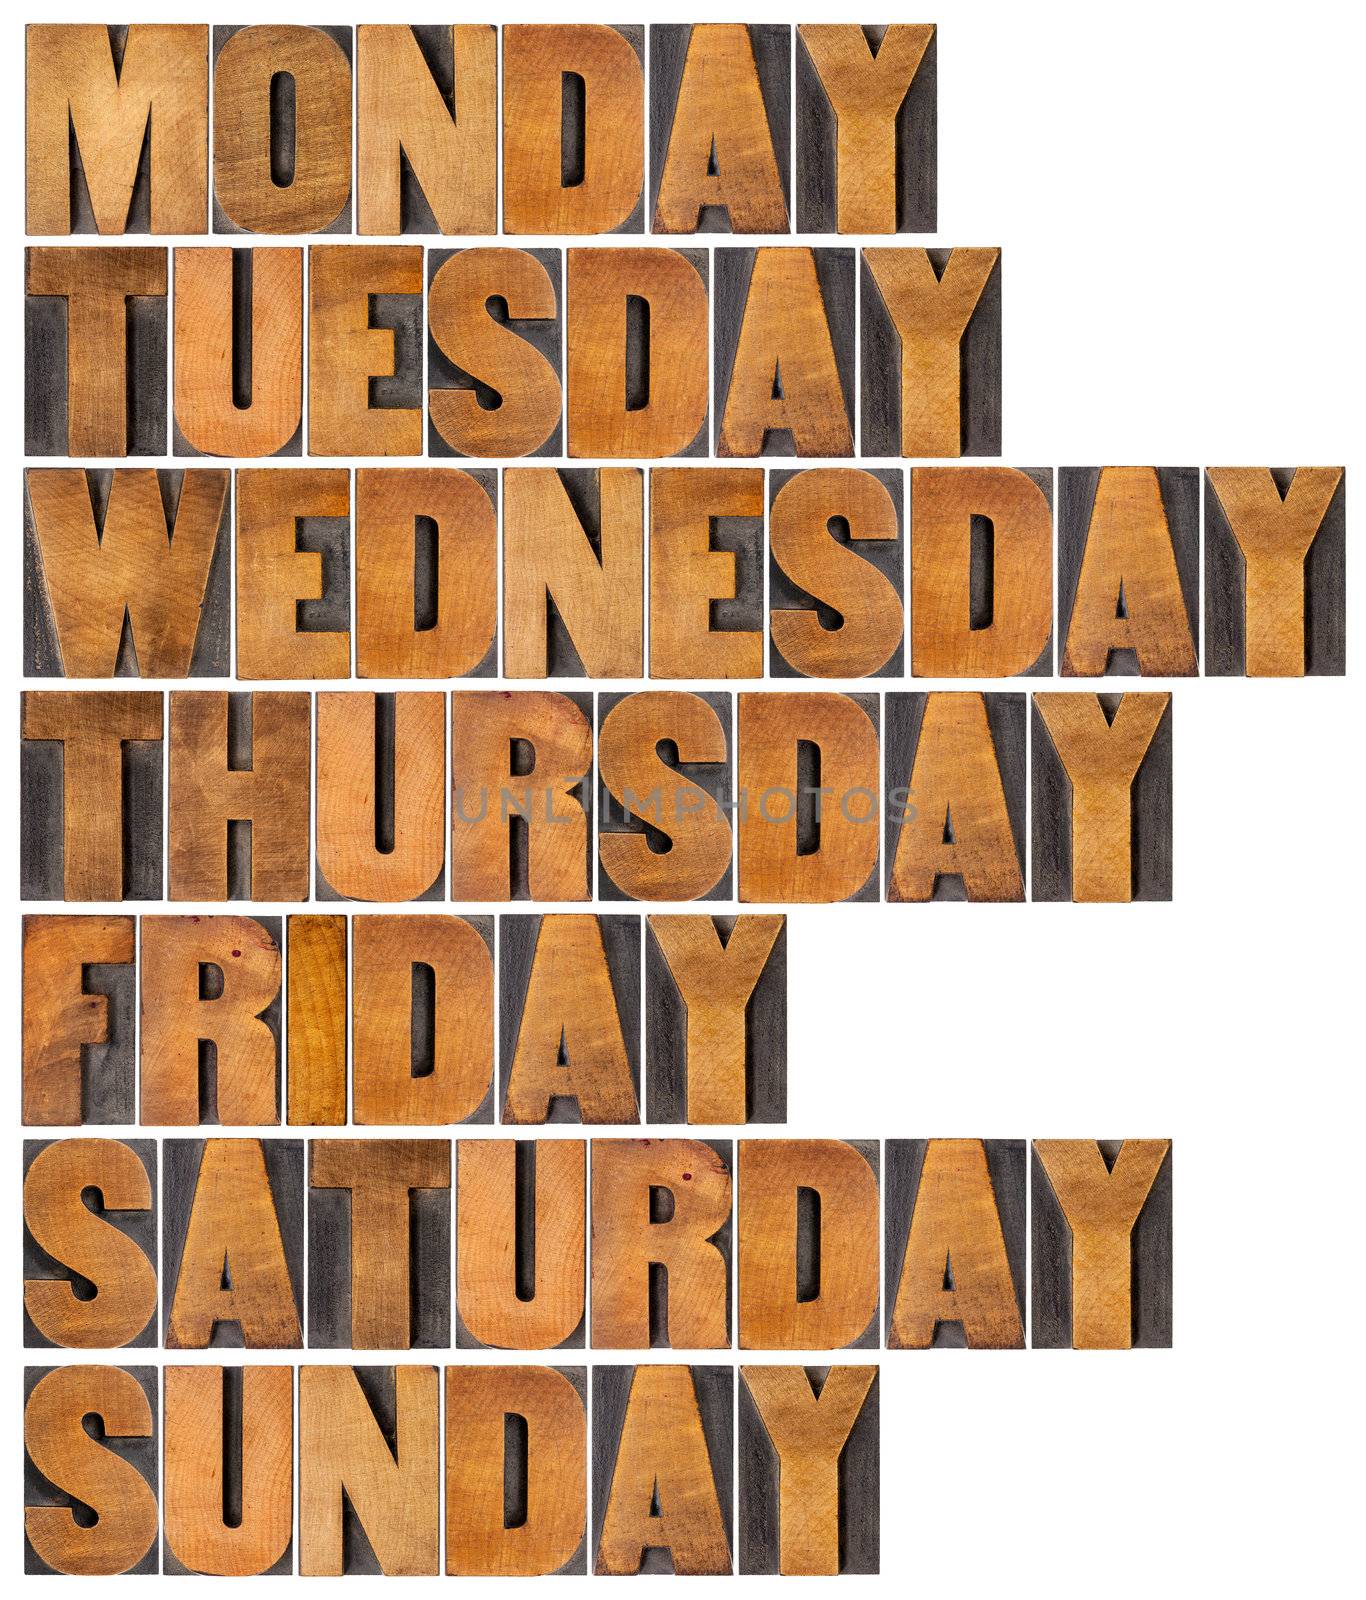 seven days of week from Monday to Sunday in isolated vintage letterpress wood type printing blocks